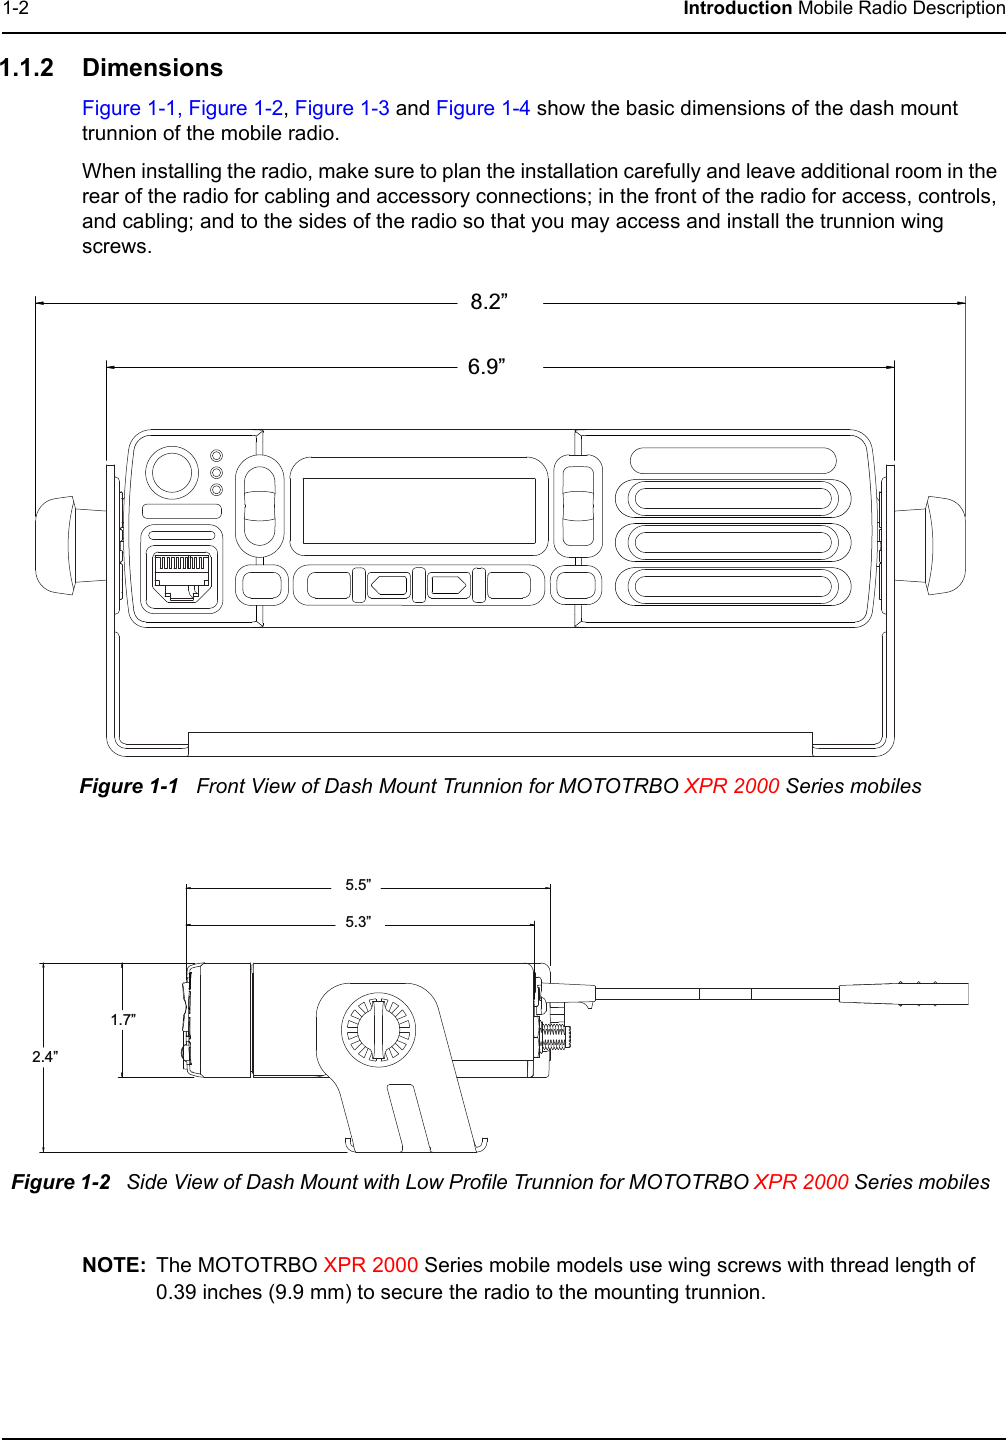 1-2 Introduction Mobile Radio Description1.1.2 DimensionsFigure 1-1, Figure 1-2, Figure 1-3 and Figure 1-4 show the basic dimensions of the dash mount trunnion of the mobile radio.When installing the radio, make sure to plan the installation carefully and leave additional room in the rear of the radio for cabling and accessory connections; in the front of the radio for access, controls, and cabling; and to the sides of the radio so that you may access and install the trunnion wing screws.NOTE: The MOTOTRBO XPR 2000 Series mobile models use wing screws with thread length of 0.39 inches (9.9 mm) to secure the radio to the mounting trunnion.Figure 1-1   Front View of Dash Mount Trunnion for MOTOTRBO XPR 2000 Series mobilesFigure 1-2   Side View of Dash Mount with Low Profile Trunnion for MOTOTRBO XPR 2000 Series mobiles8.2”6.9”5.5”5.3”1.7”2.4”